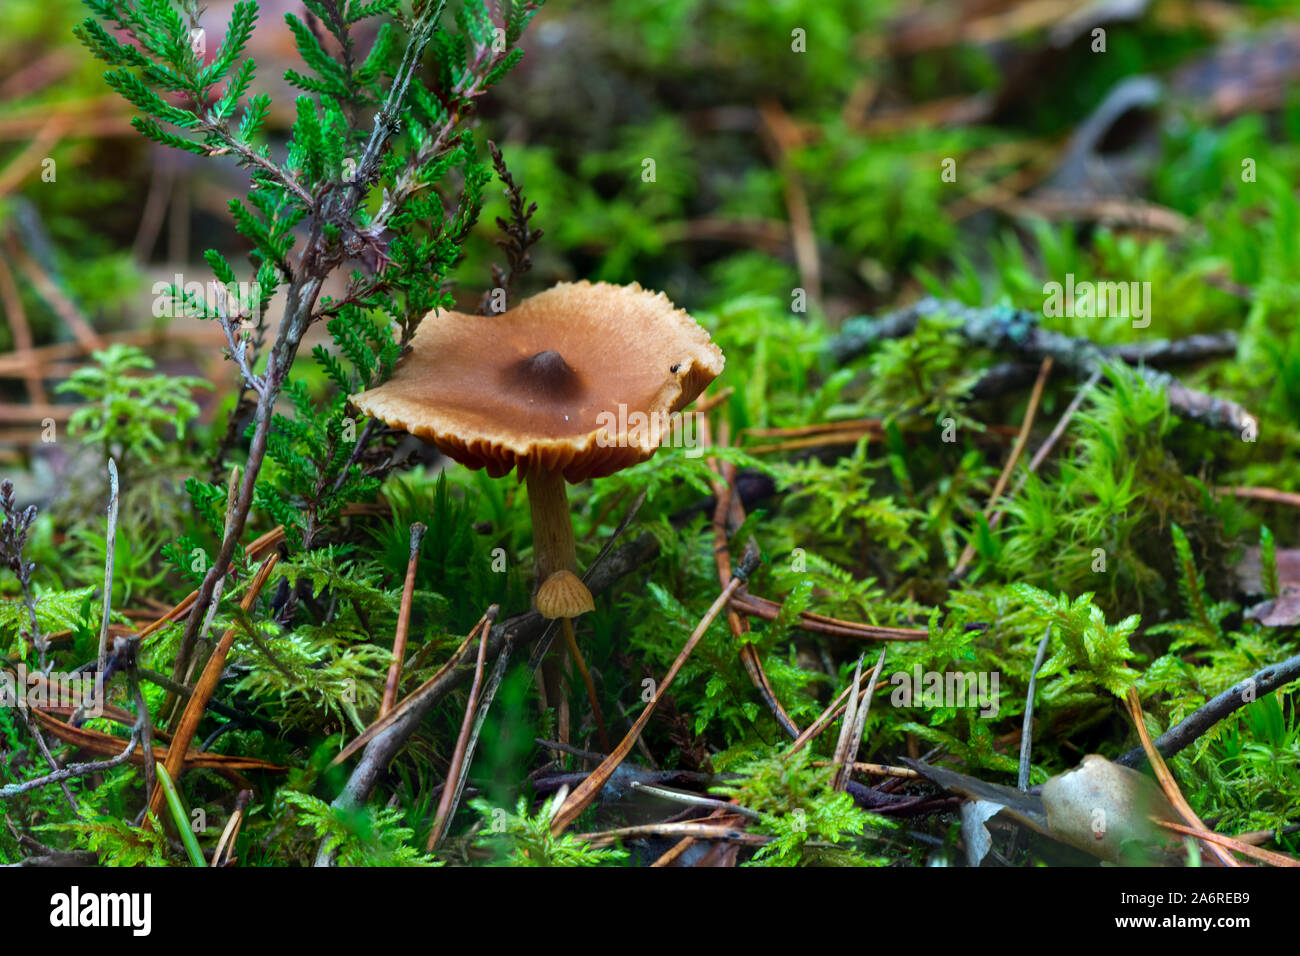 Poisonous mushroom growing in mossy forest. Stock Photo